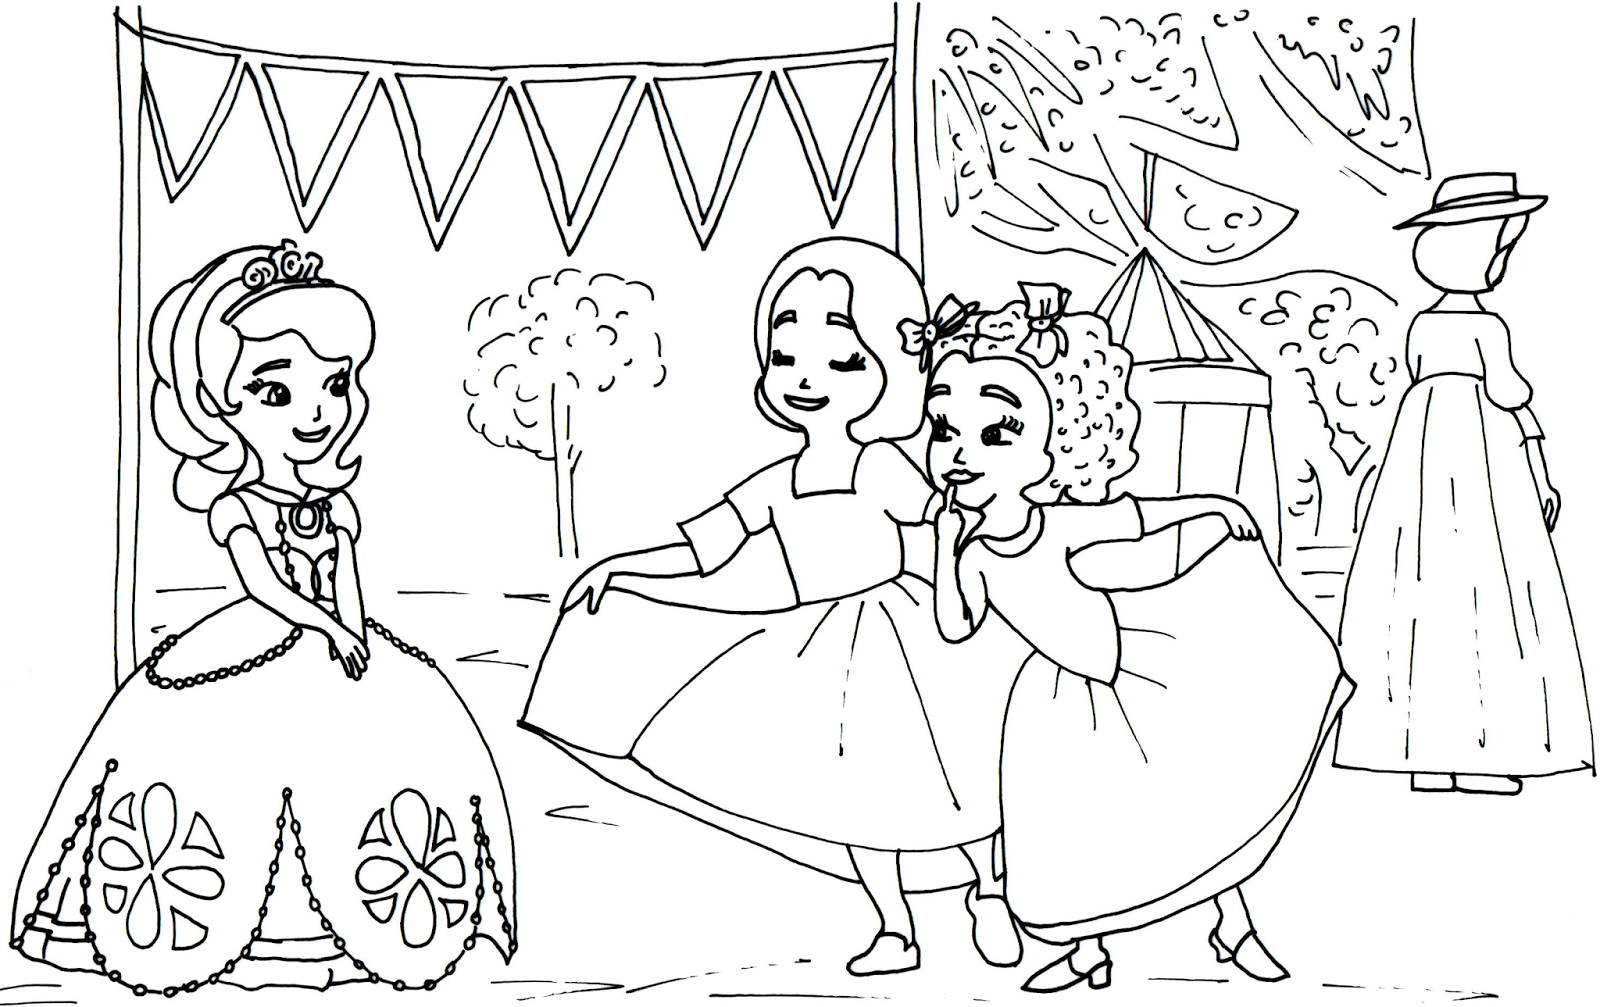 Download Sofia the First Coloring Pages - Best Coloring Pages For Kids